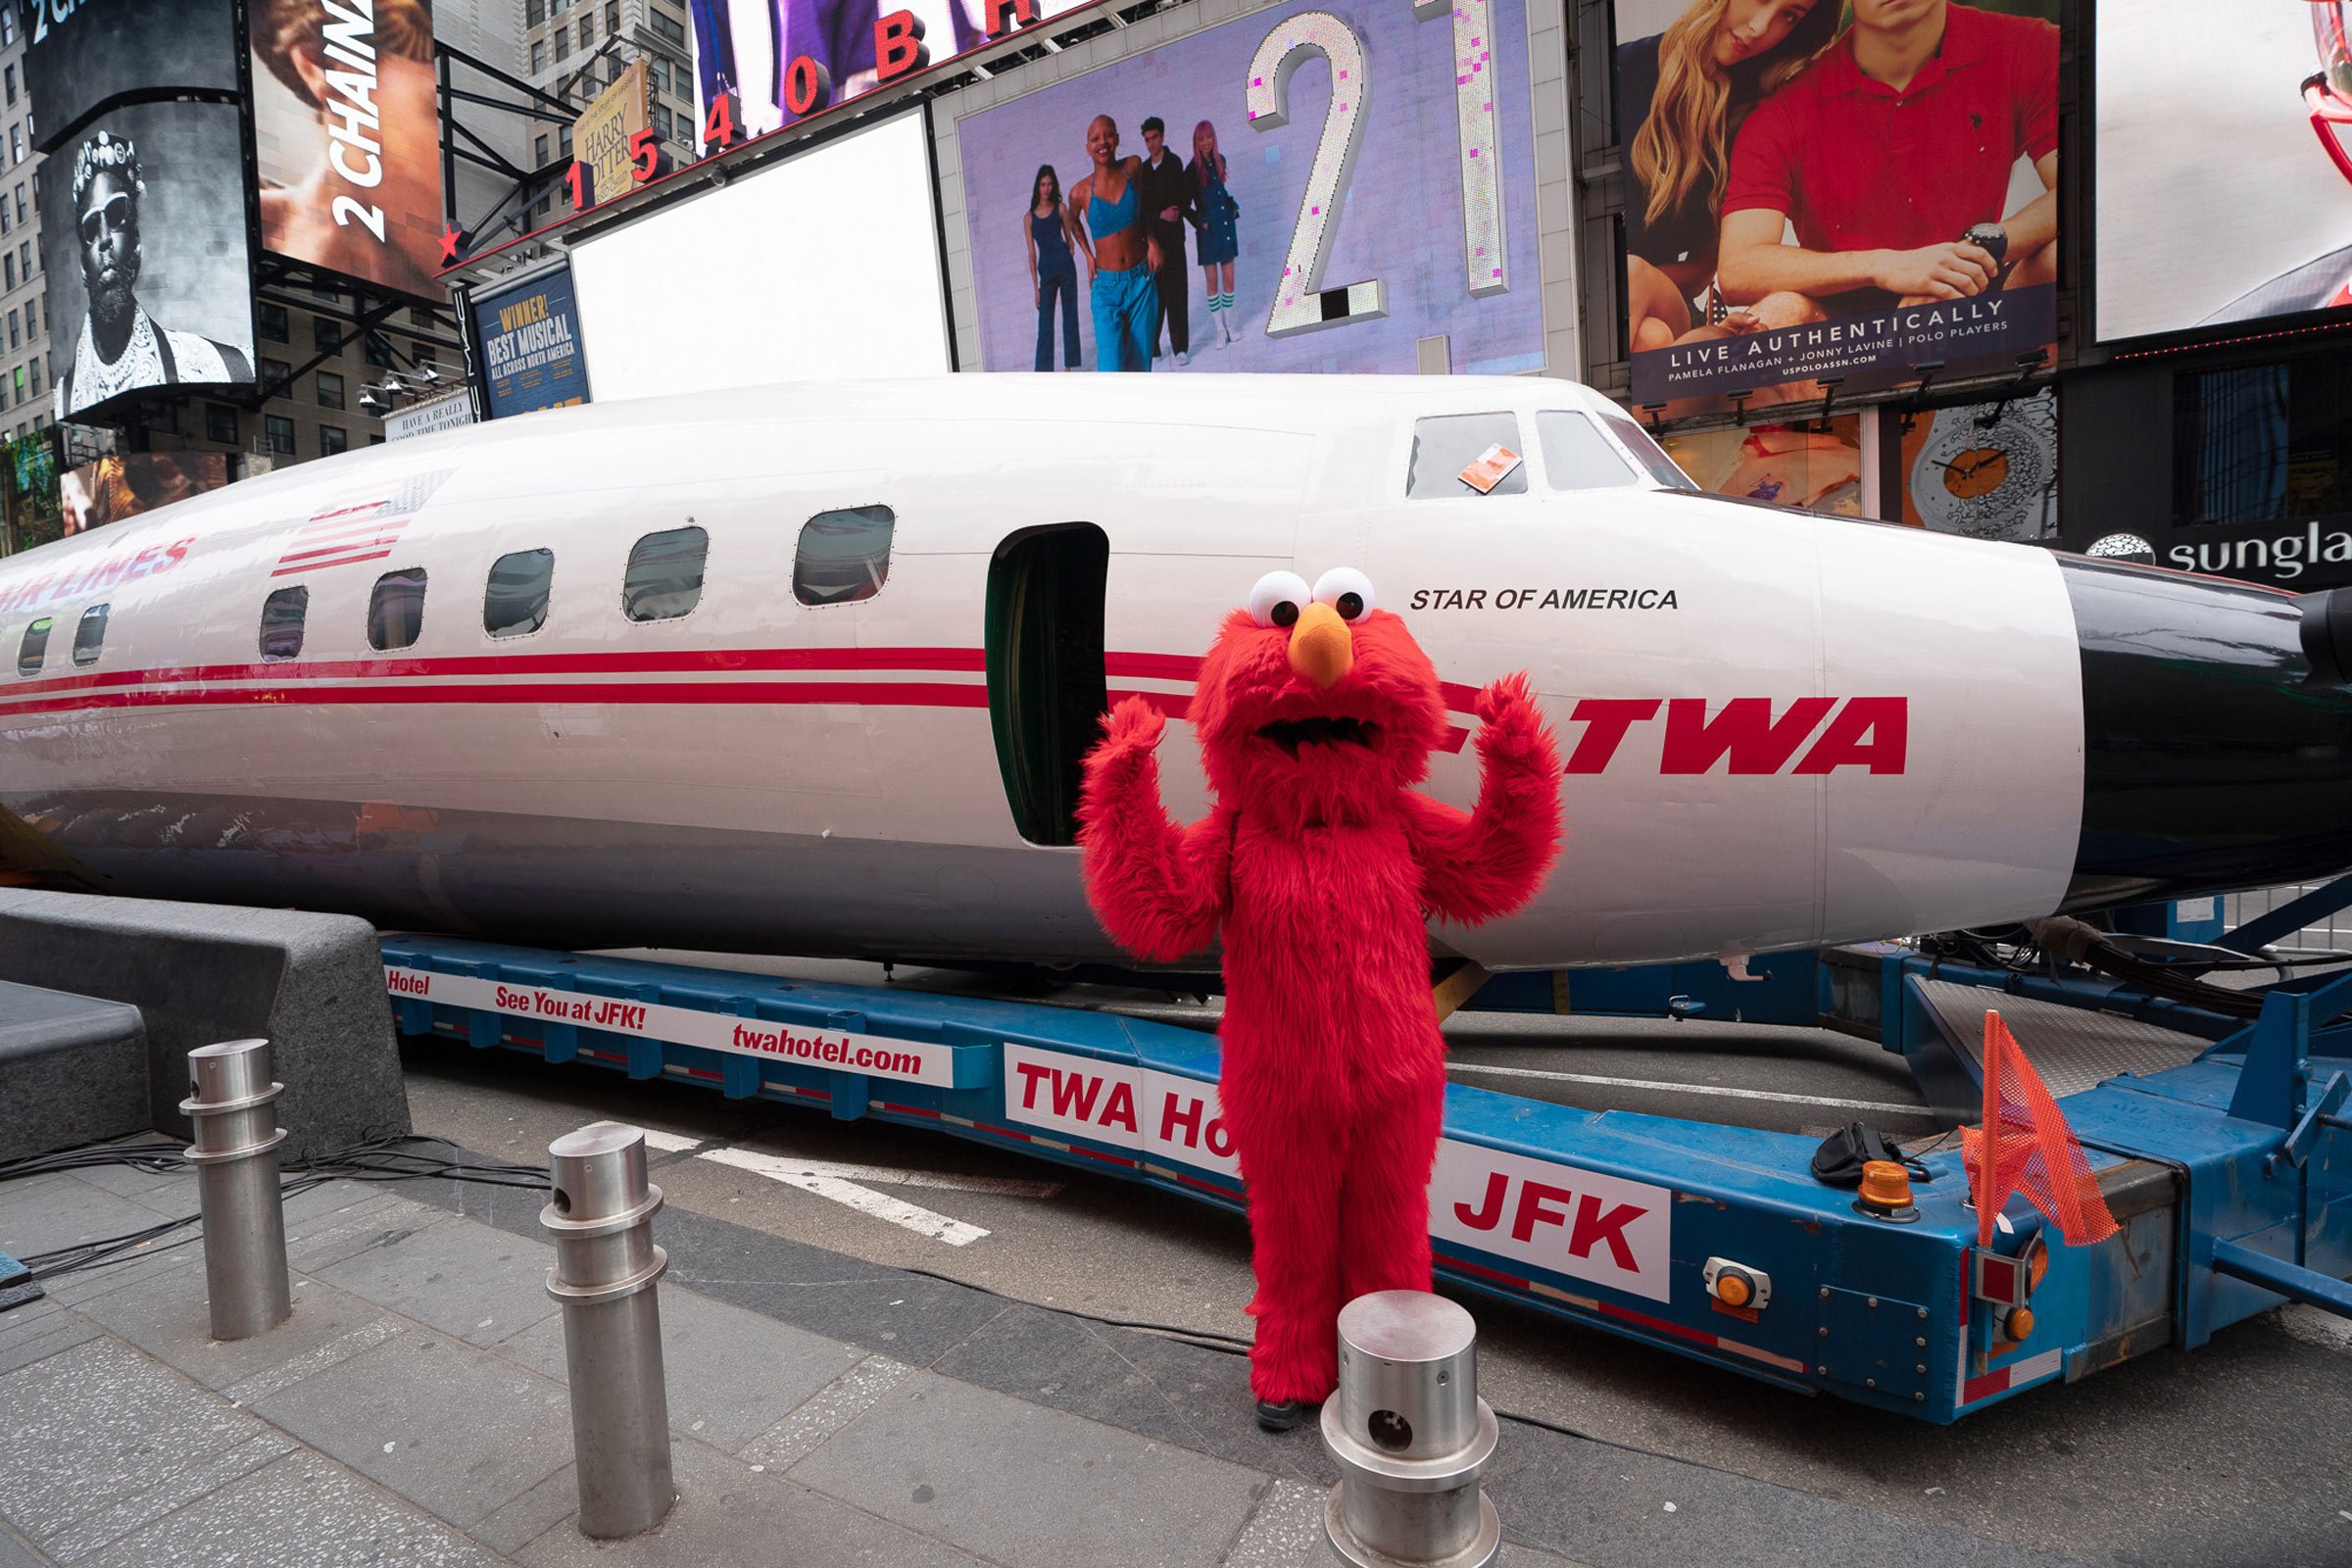 Does this plane stop on Sesame Street? Elmo visits Connie on March 23, 2019.